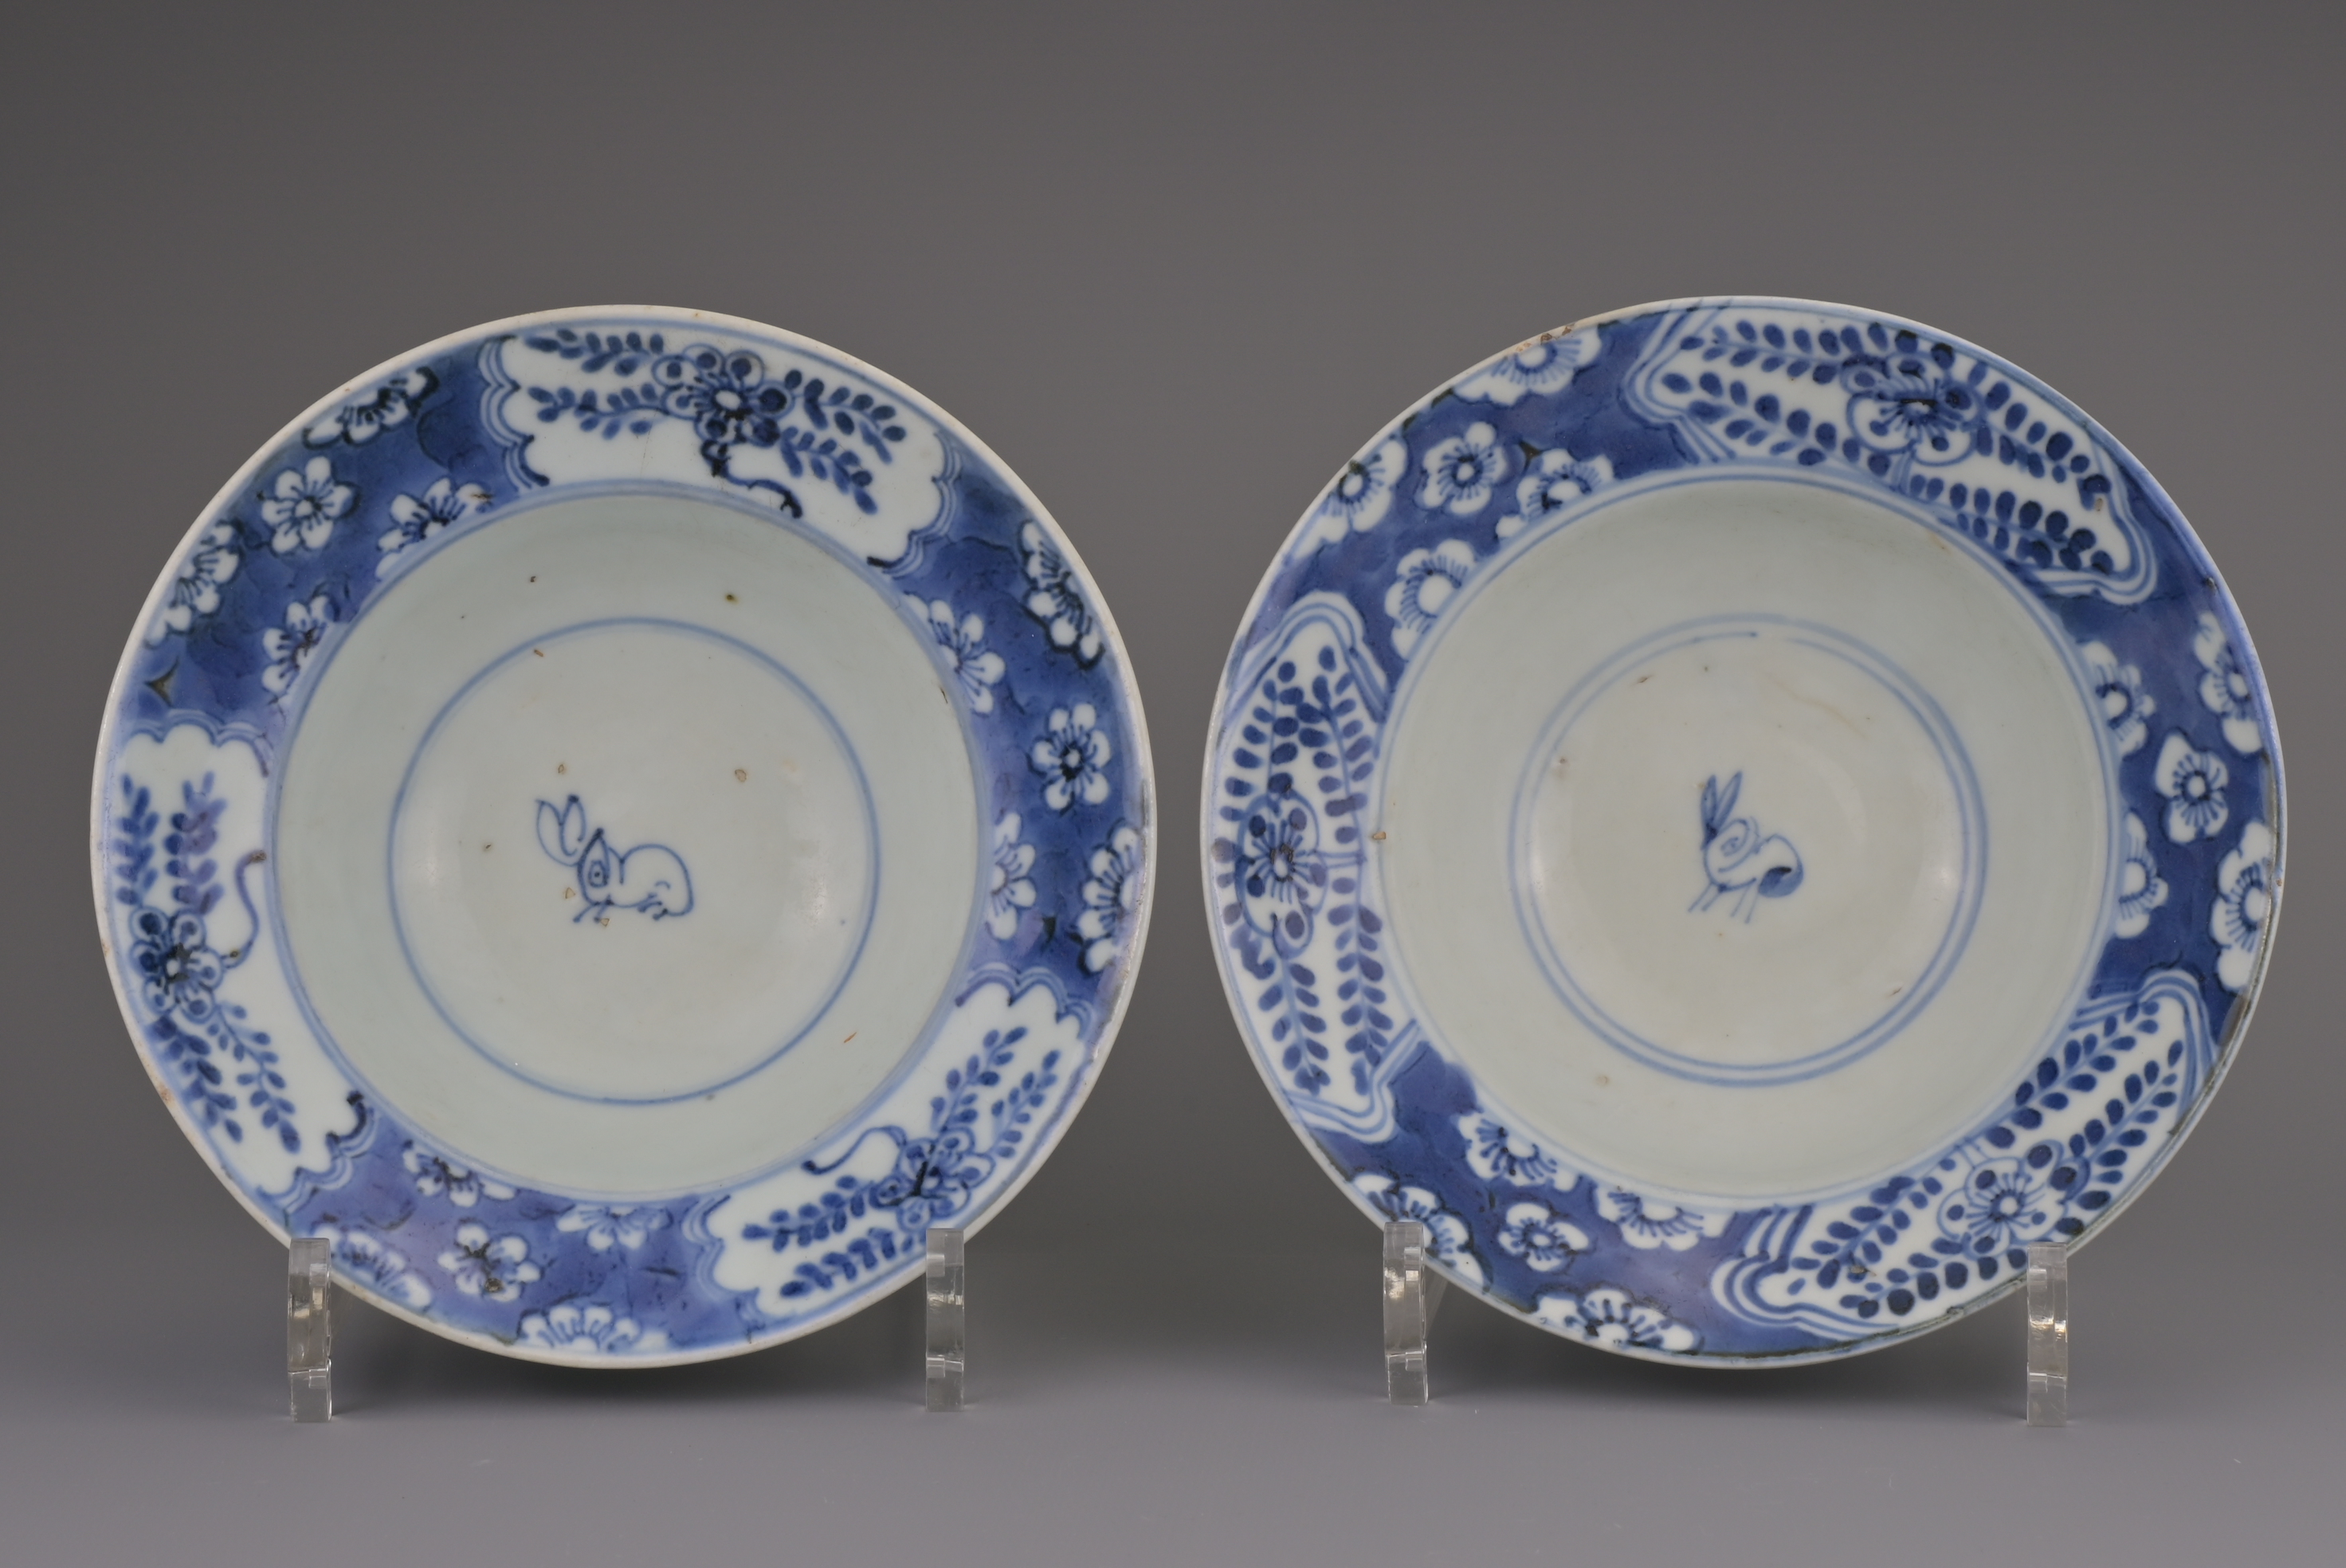 A PAIR OF CHINESE BLUE AND WHITE PORCELAIN KLAPMUTS BOWLS, LATE MING/EARLY QING DYNASTY, 17TH CENTUR - Image 5 of 8